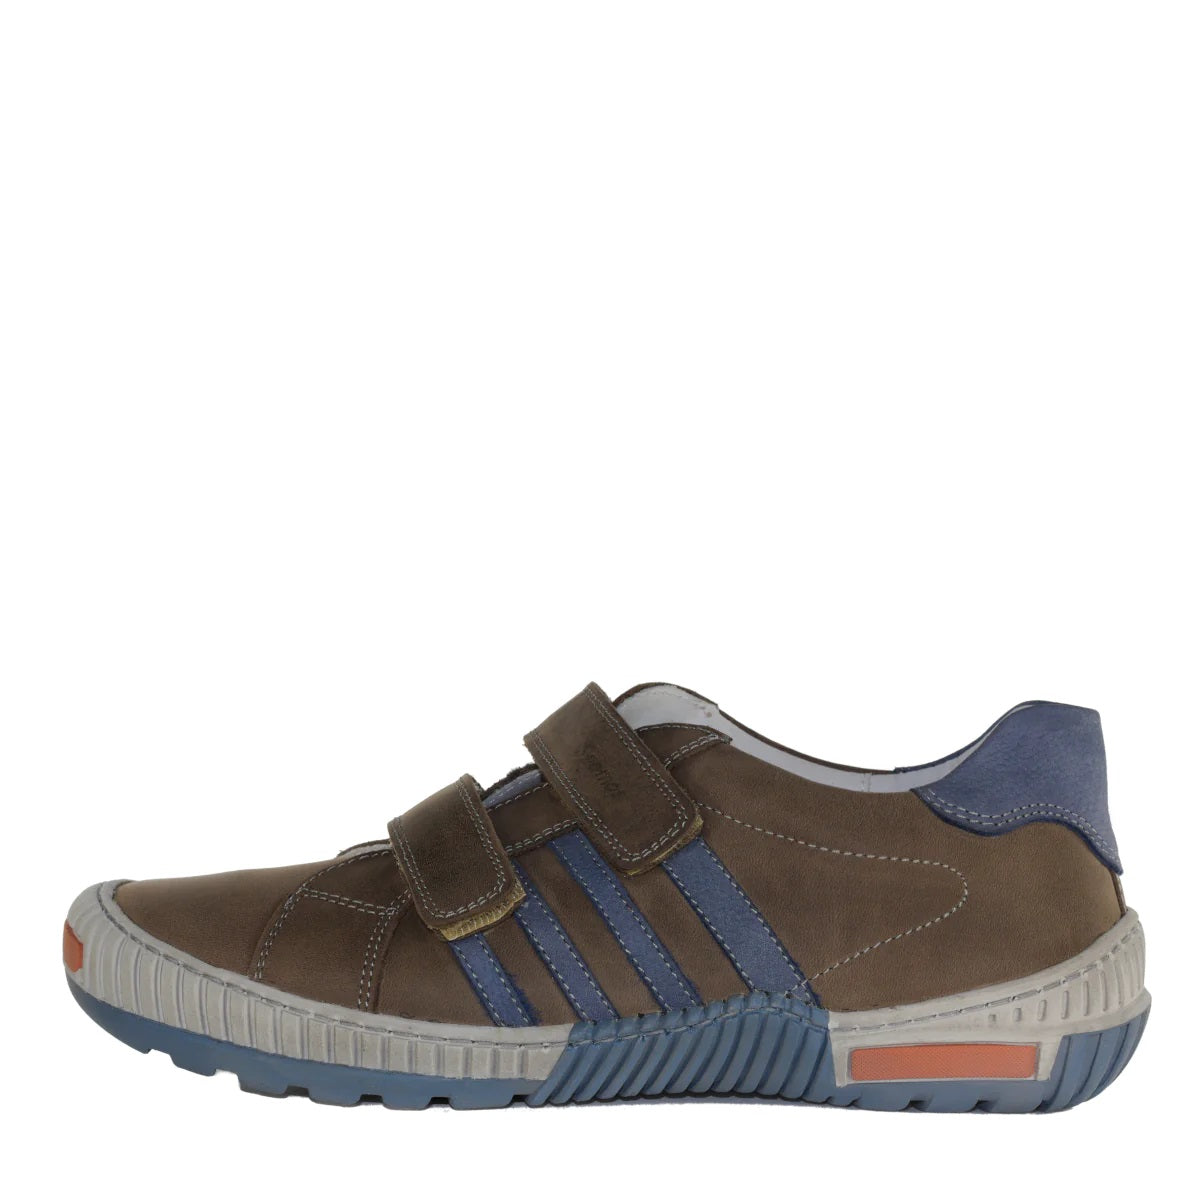 Szamos Kid Boy Sneakers In Brown Color With Blue Stripes And Double Velcro Strap - Made In Europe - shoekid.ca